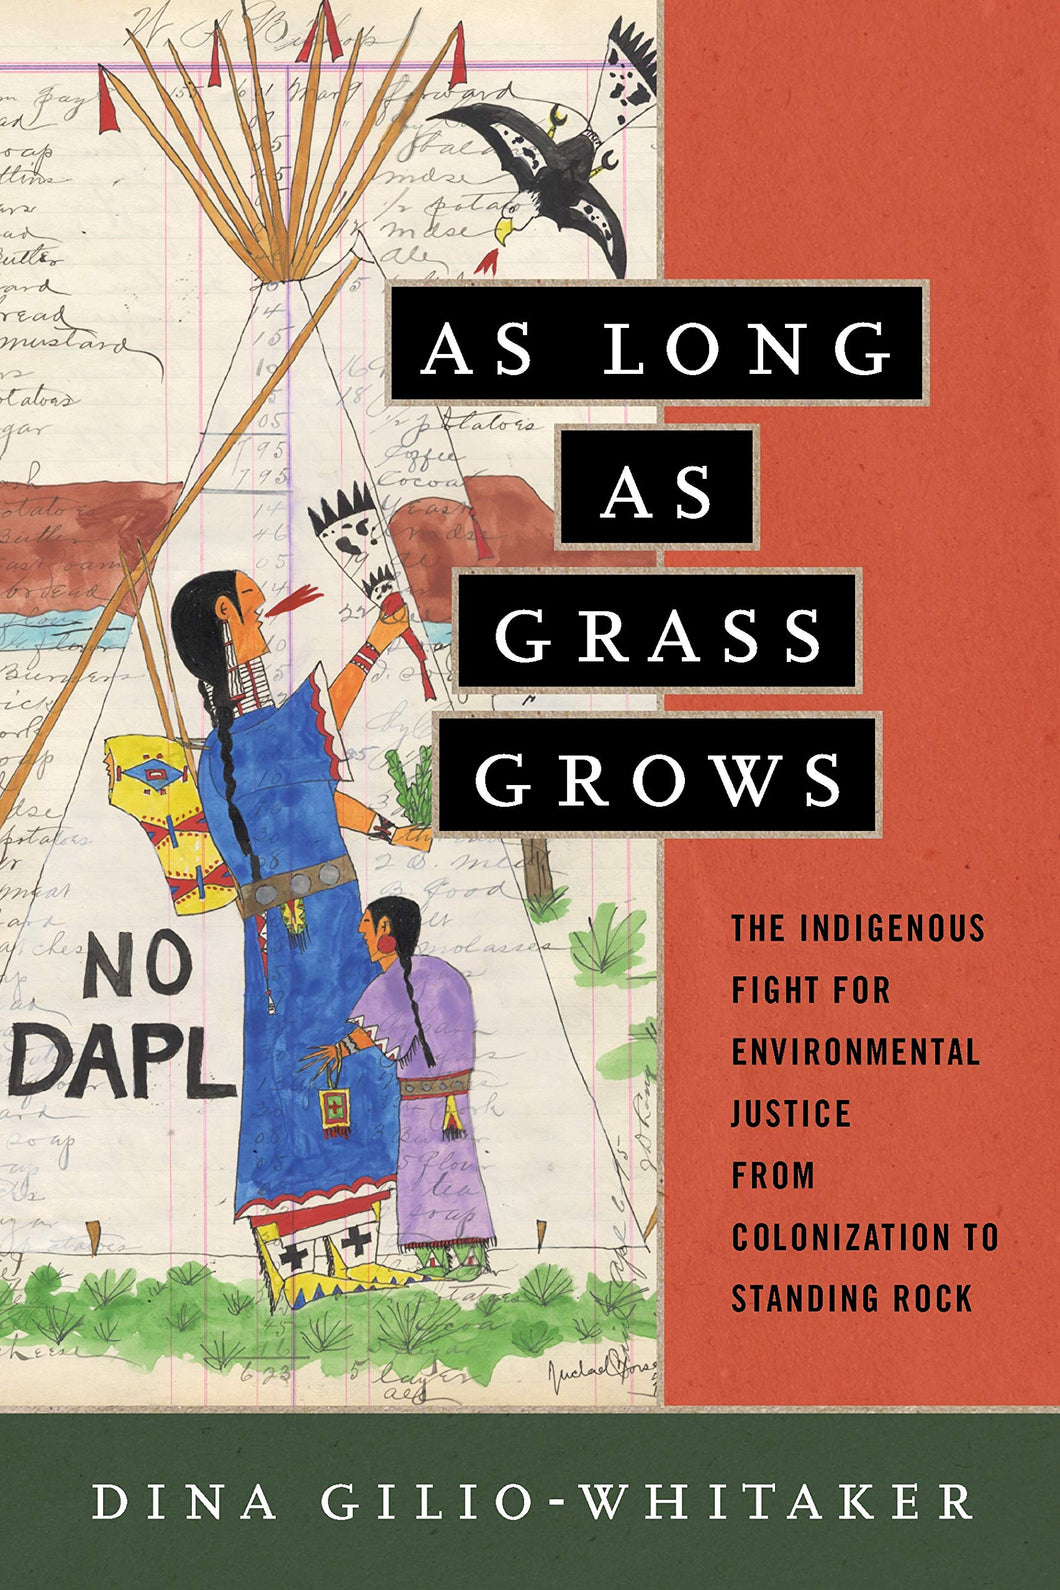 As Long as Grass Grows: The Indigenous Fight for Environmental Justice, from Colonization to Standing Rock [Dina Gilio-Whitaker]